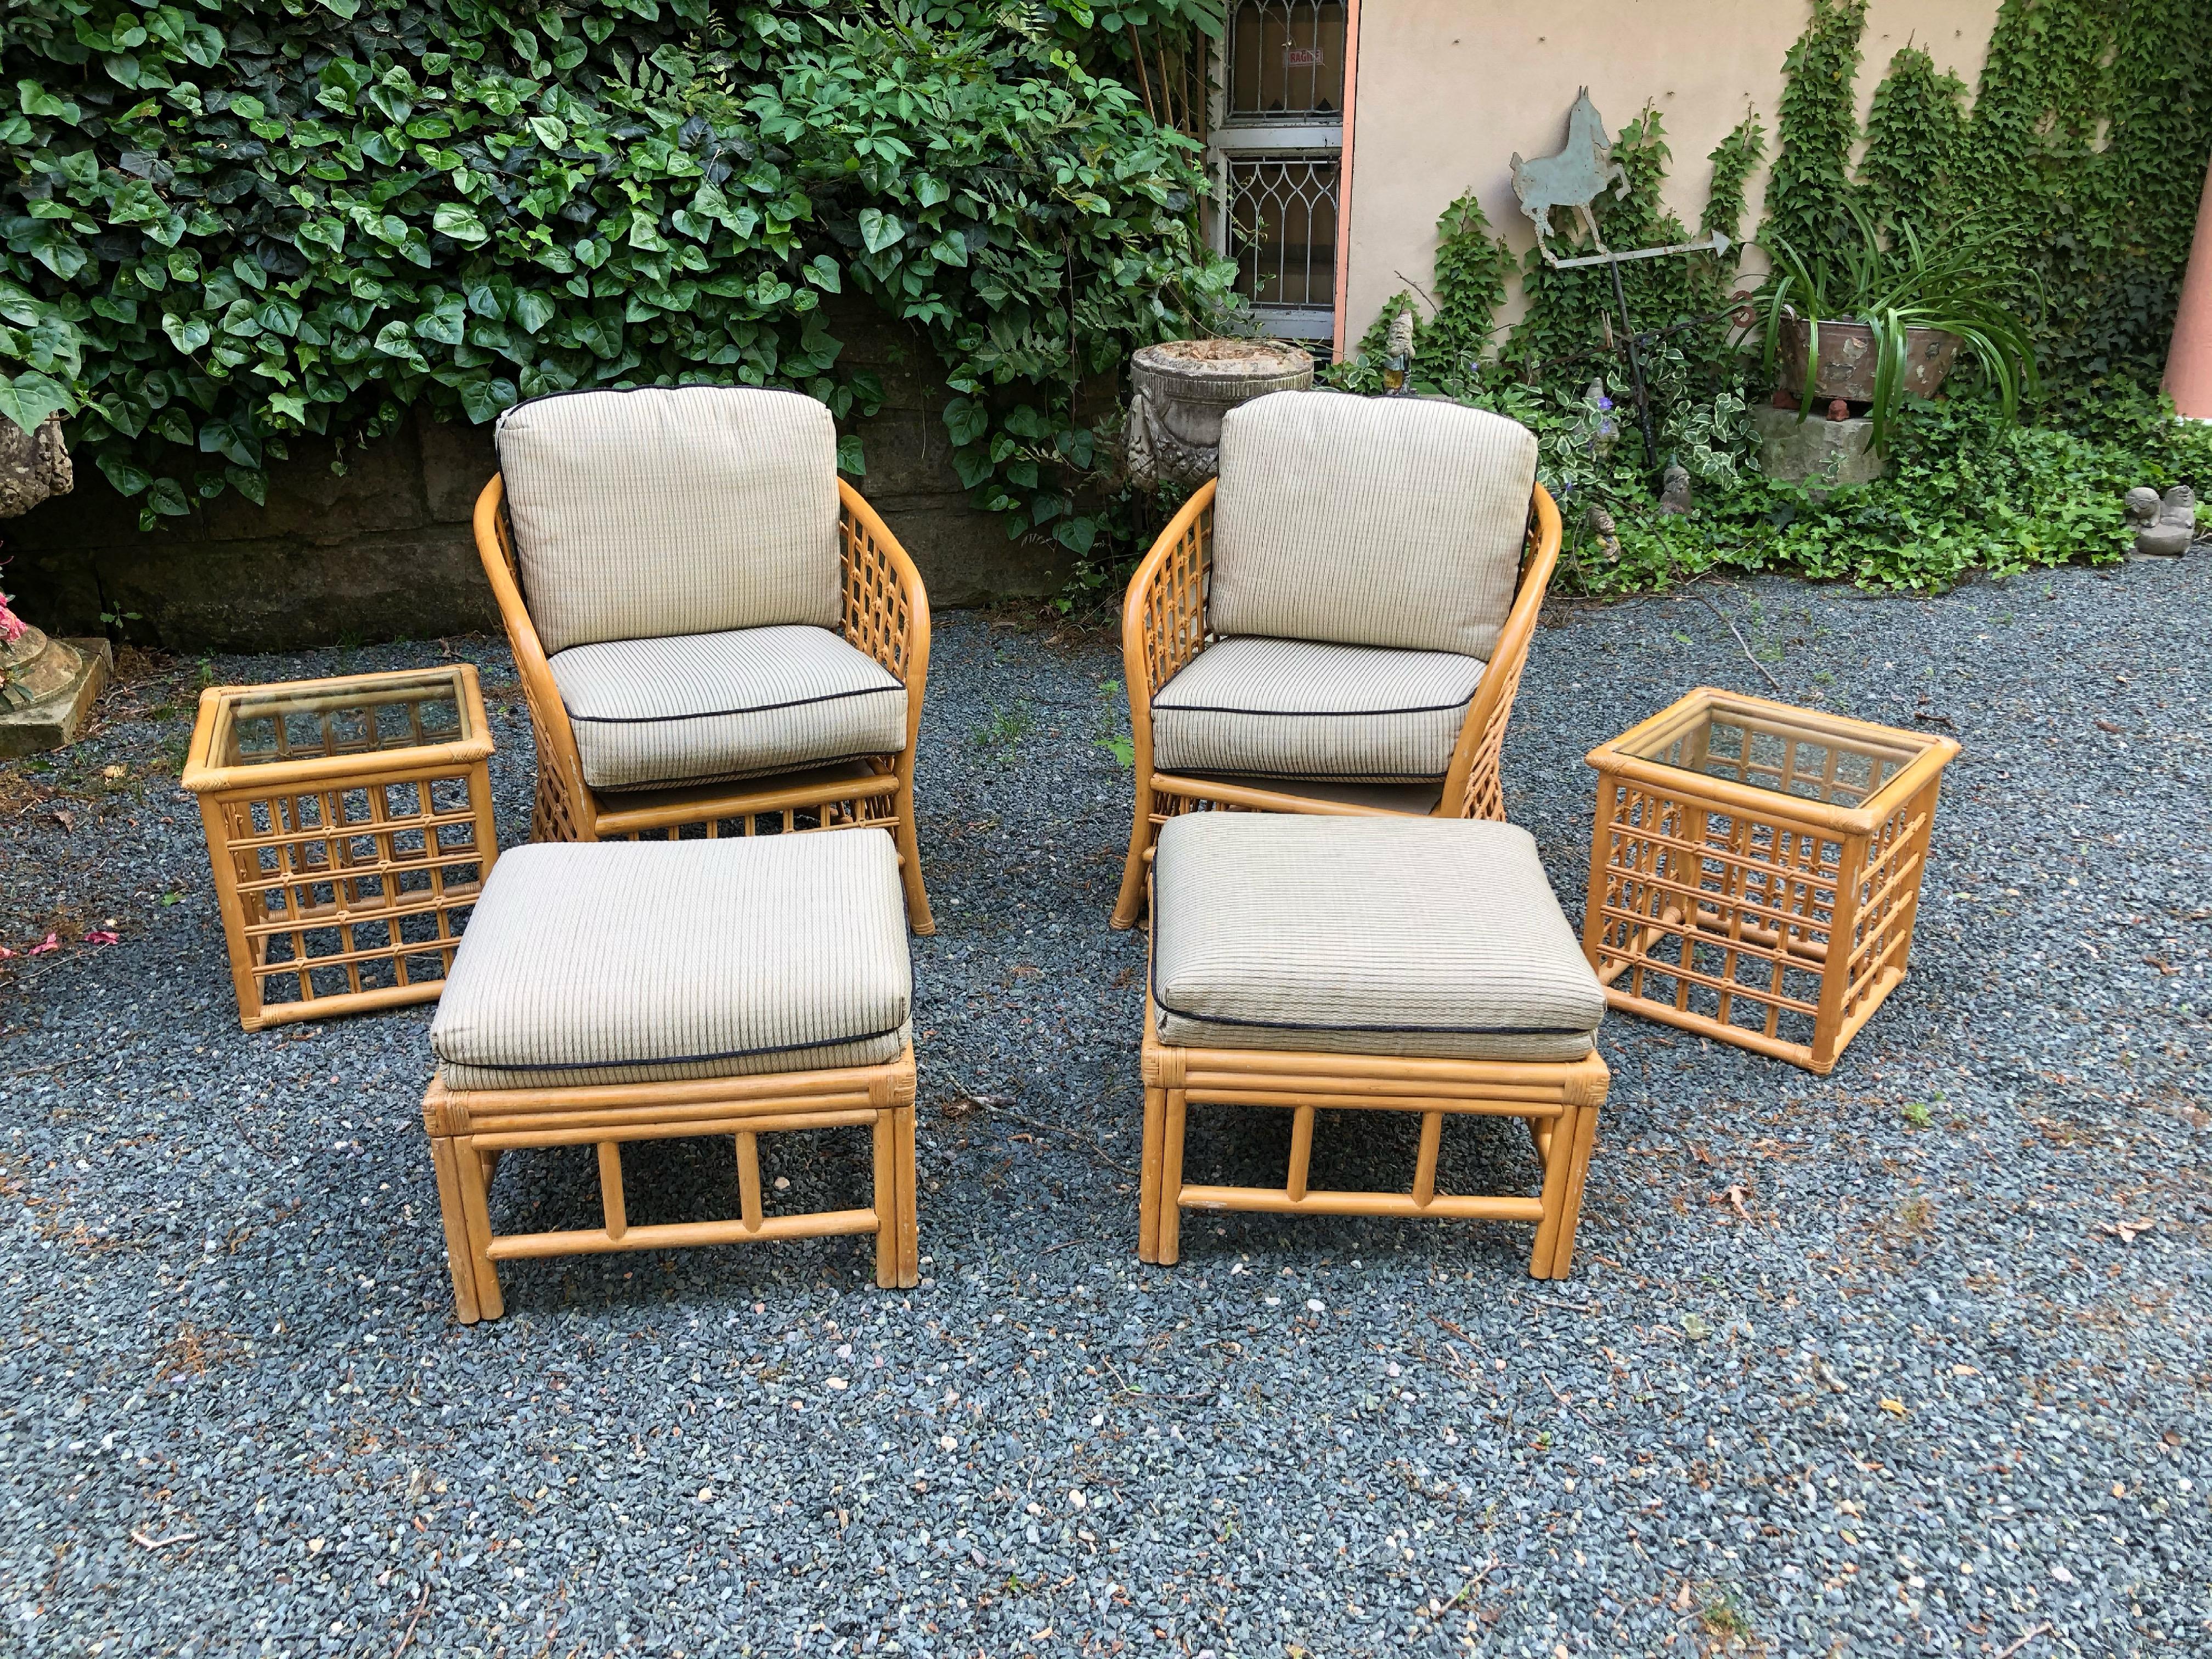 Gorgeous Vintage Rattan Barrel Back Chairs with accompanying ottoman and side tables. In nice vintage condition with minimal surface blemishes. Cushions are still in decent condition but might need new upholstery.

Chairs: 26”W x 30”D x 30.5”H  Seat